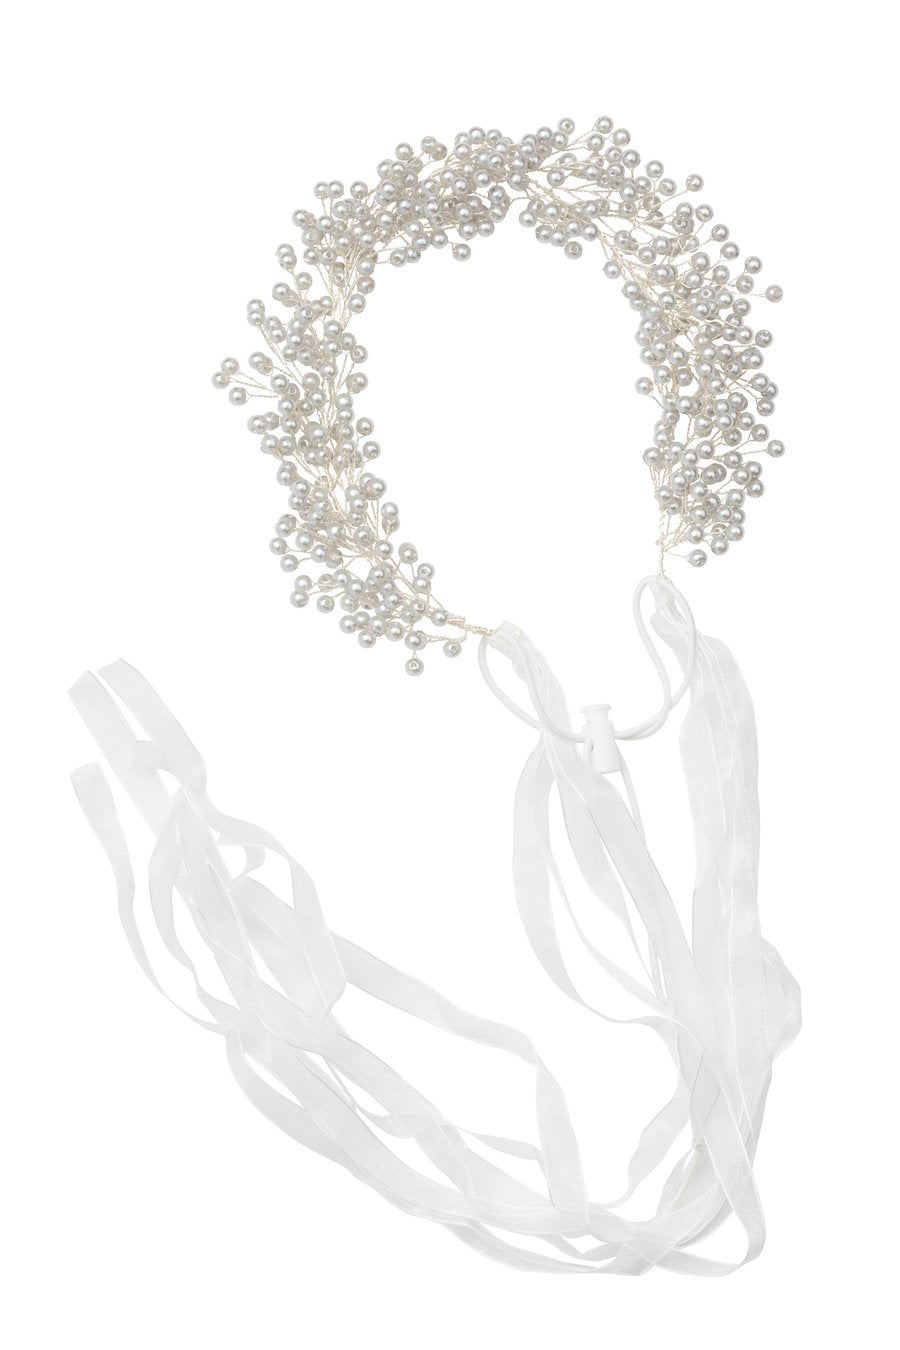 Clustered Wreath - Silver Pearl